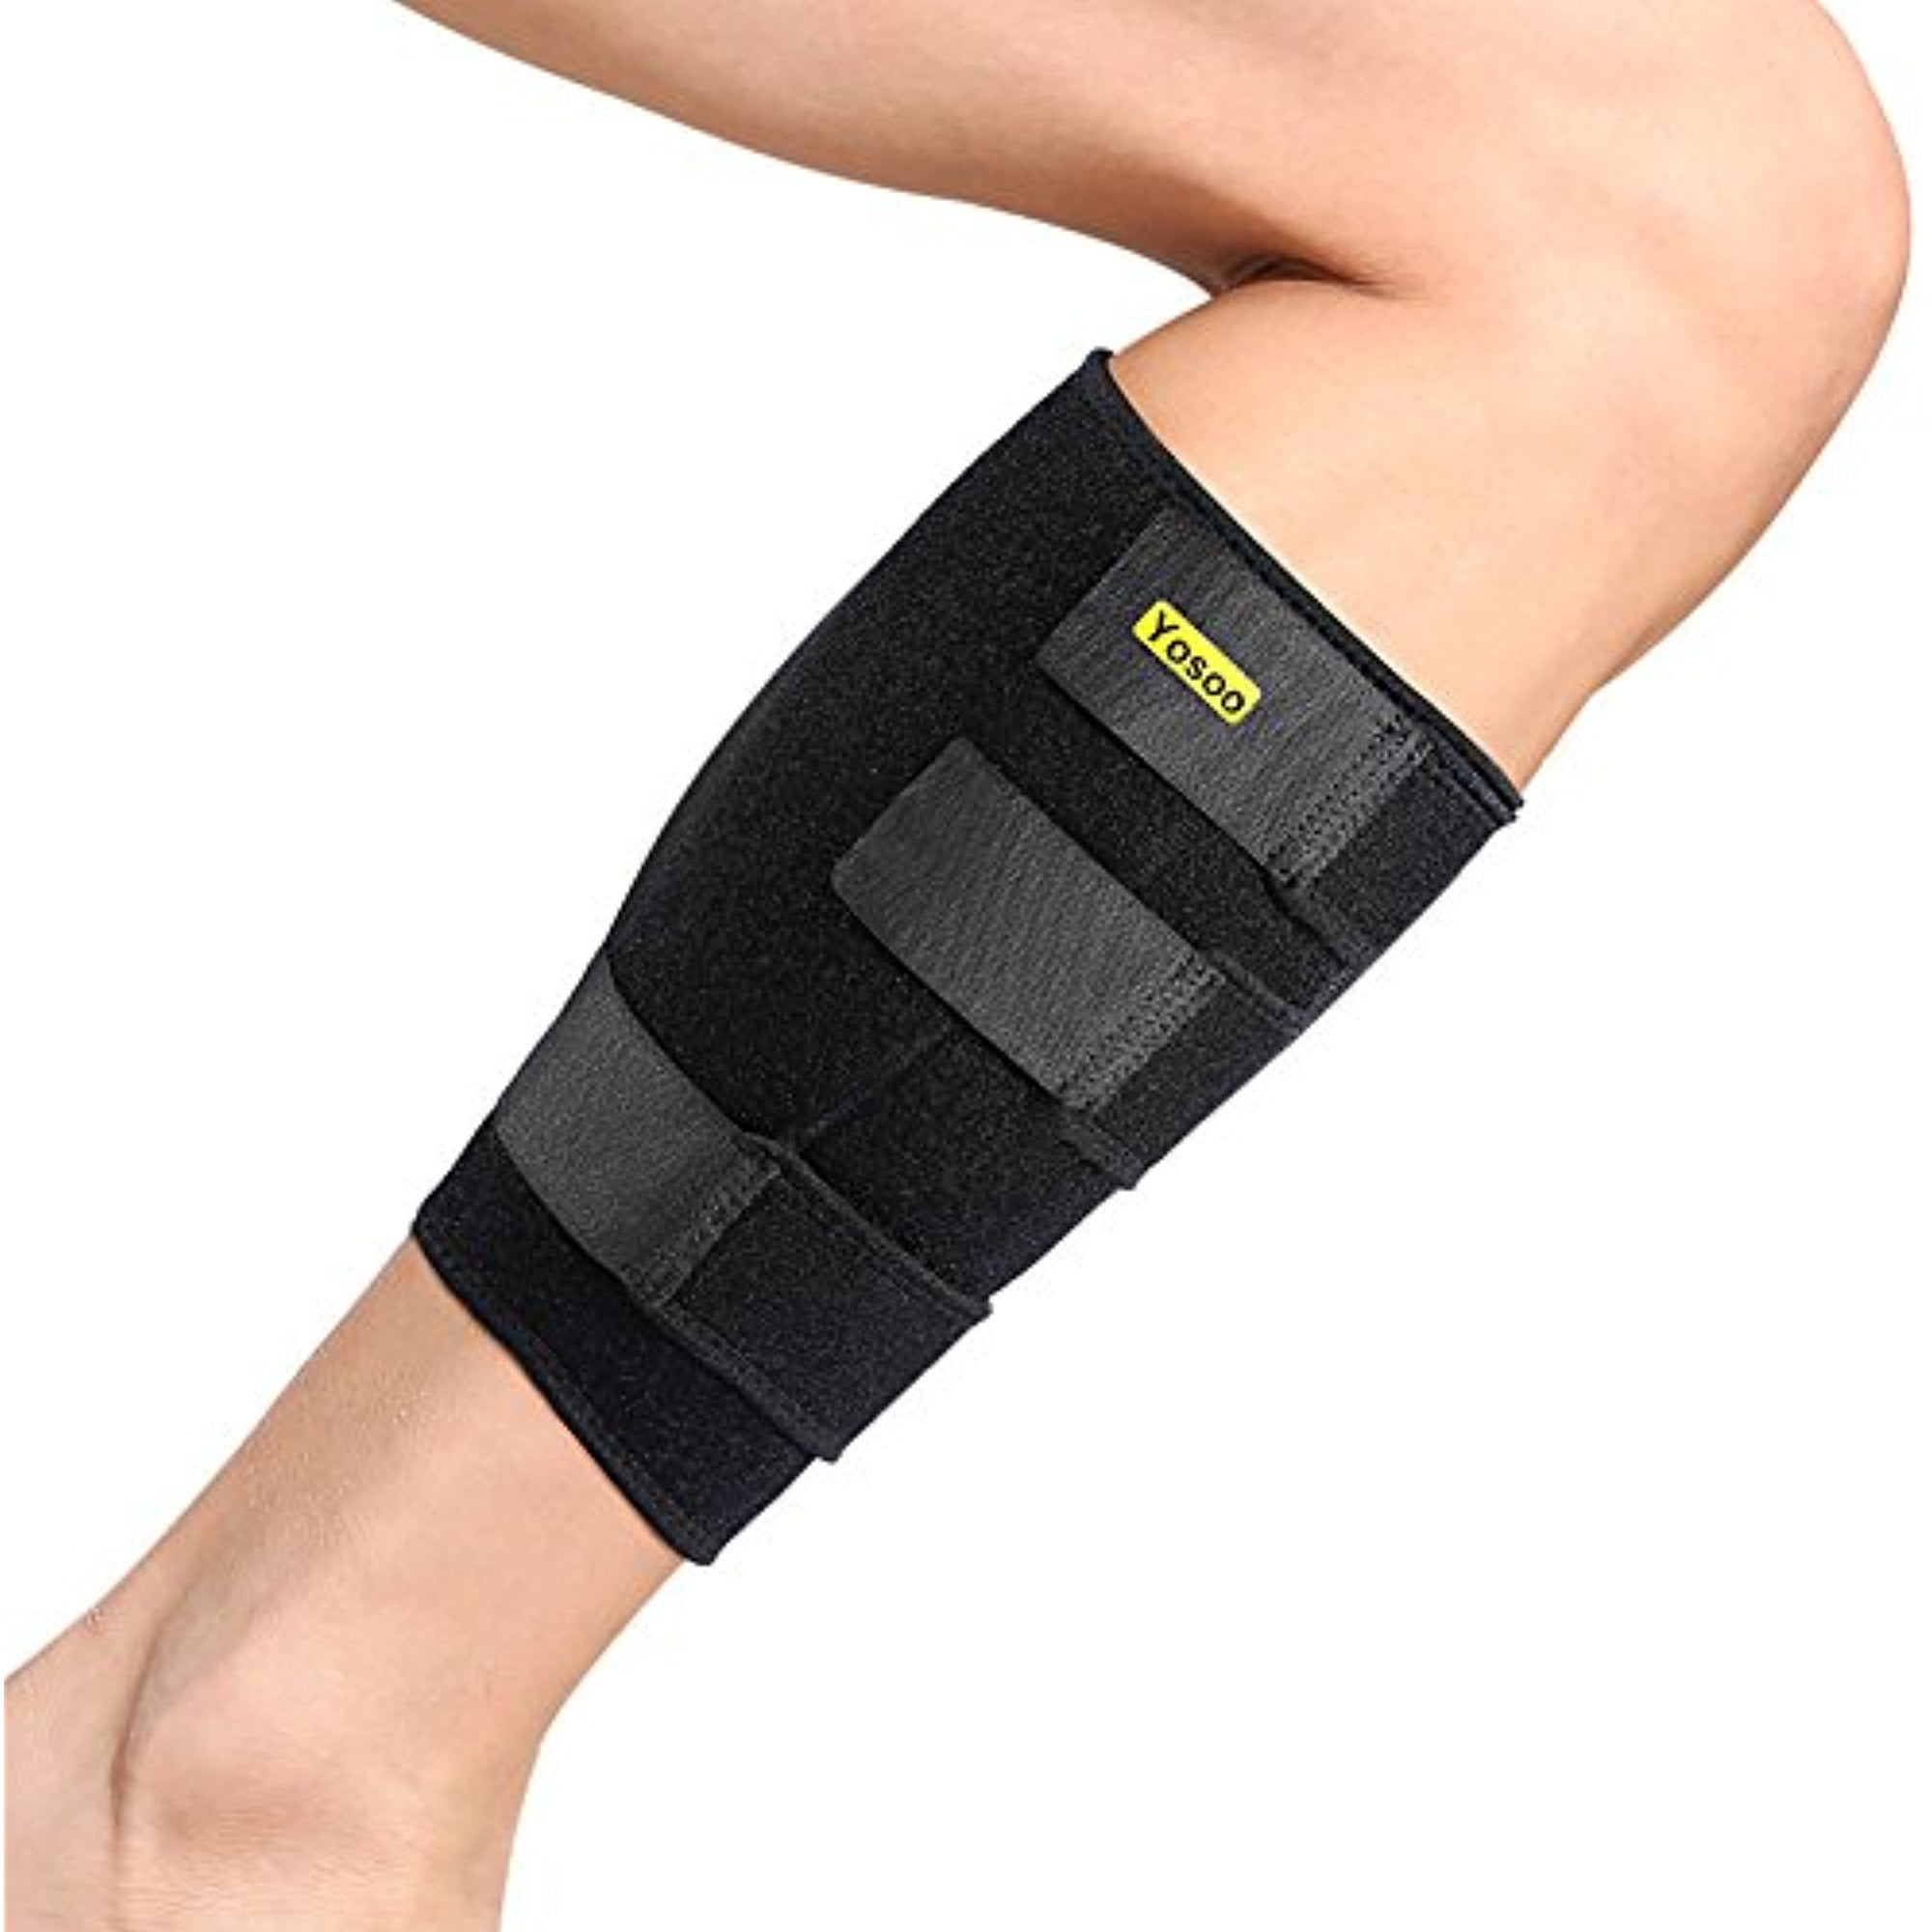 Calf Support Brace Compression Wrap Protect Strap Leg joint Shin Muscle injured 